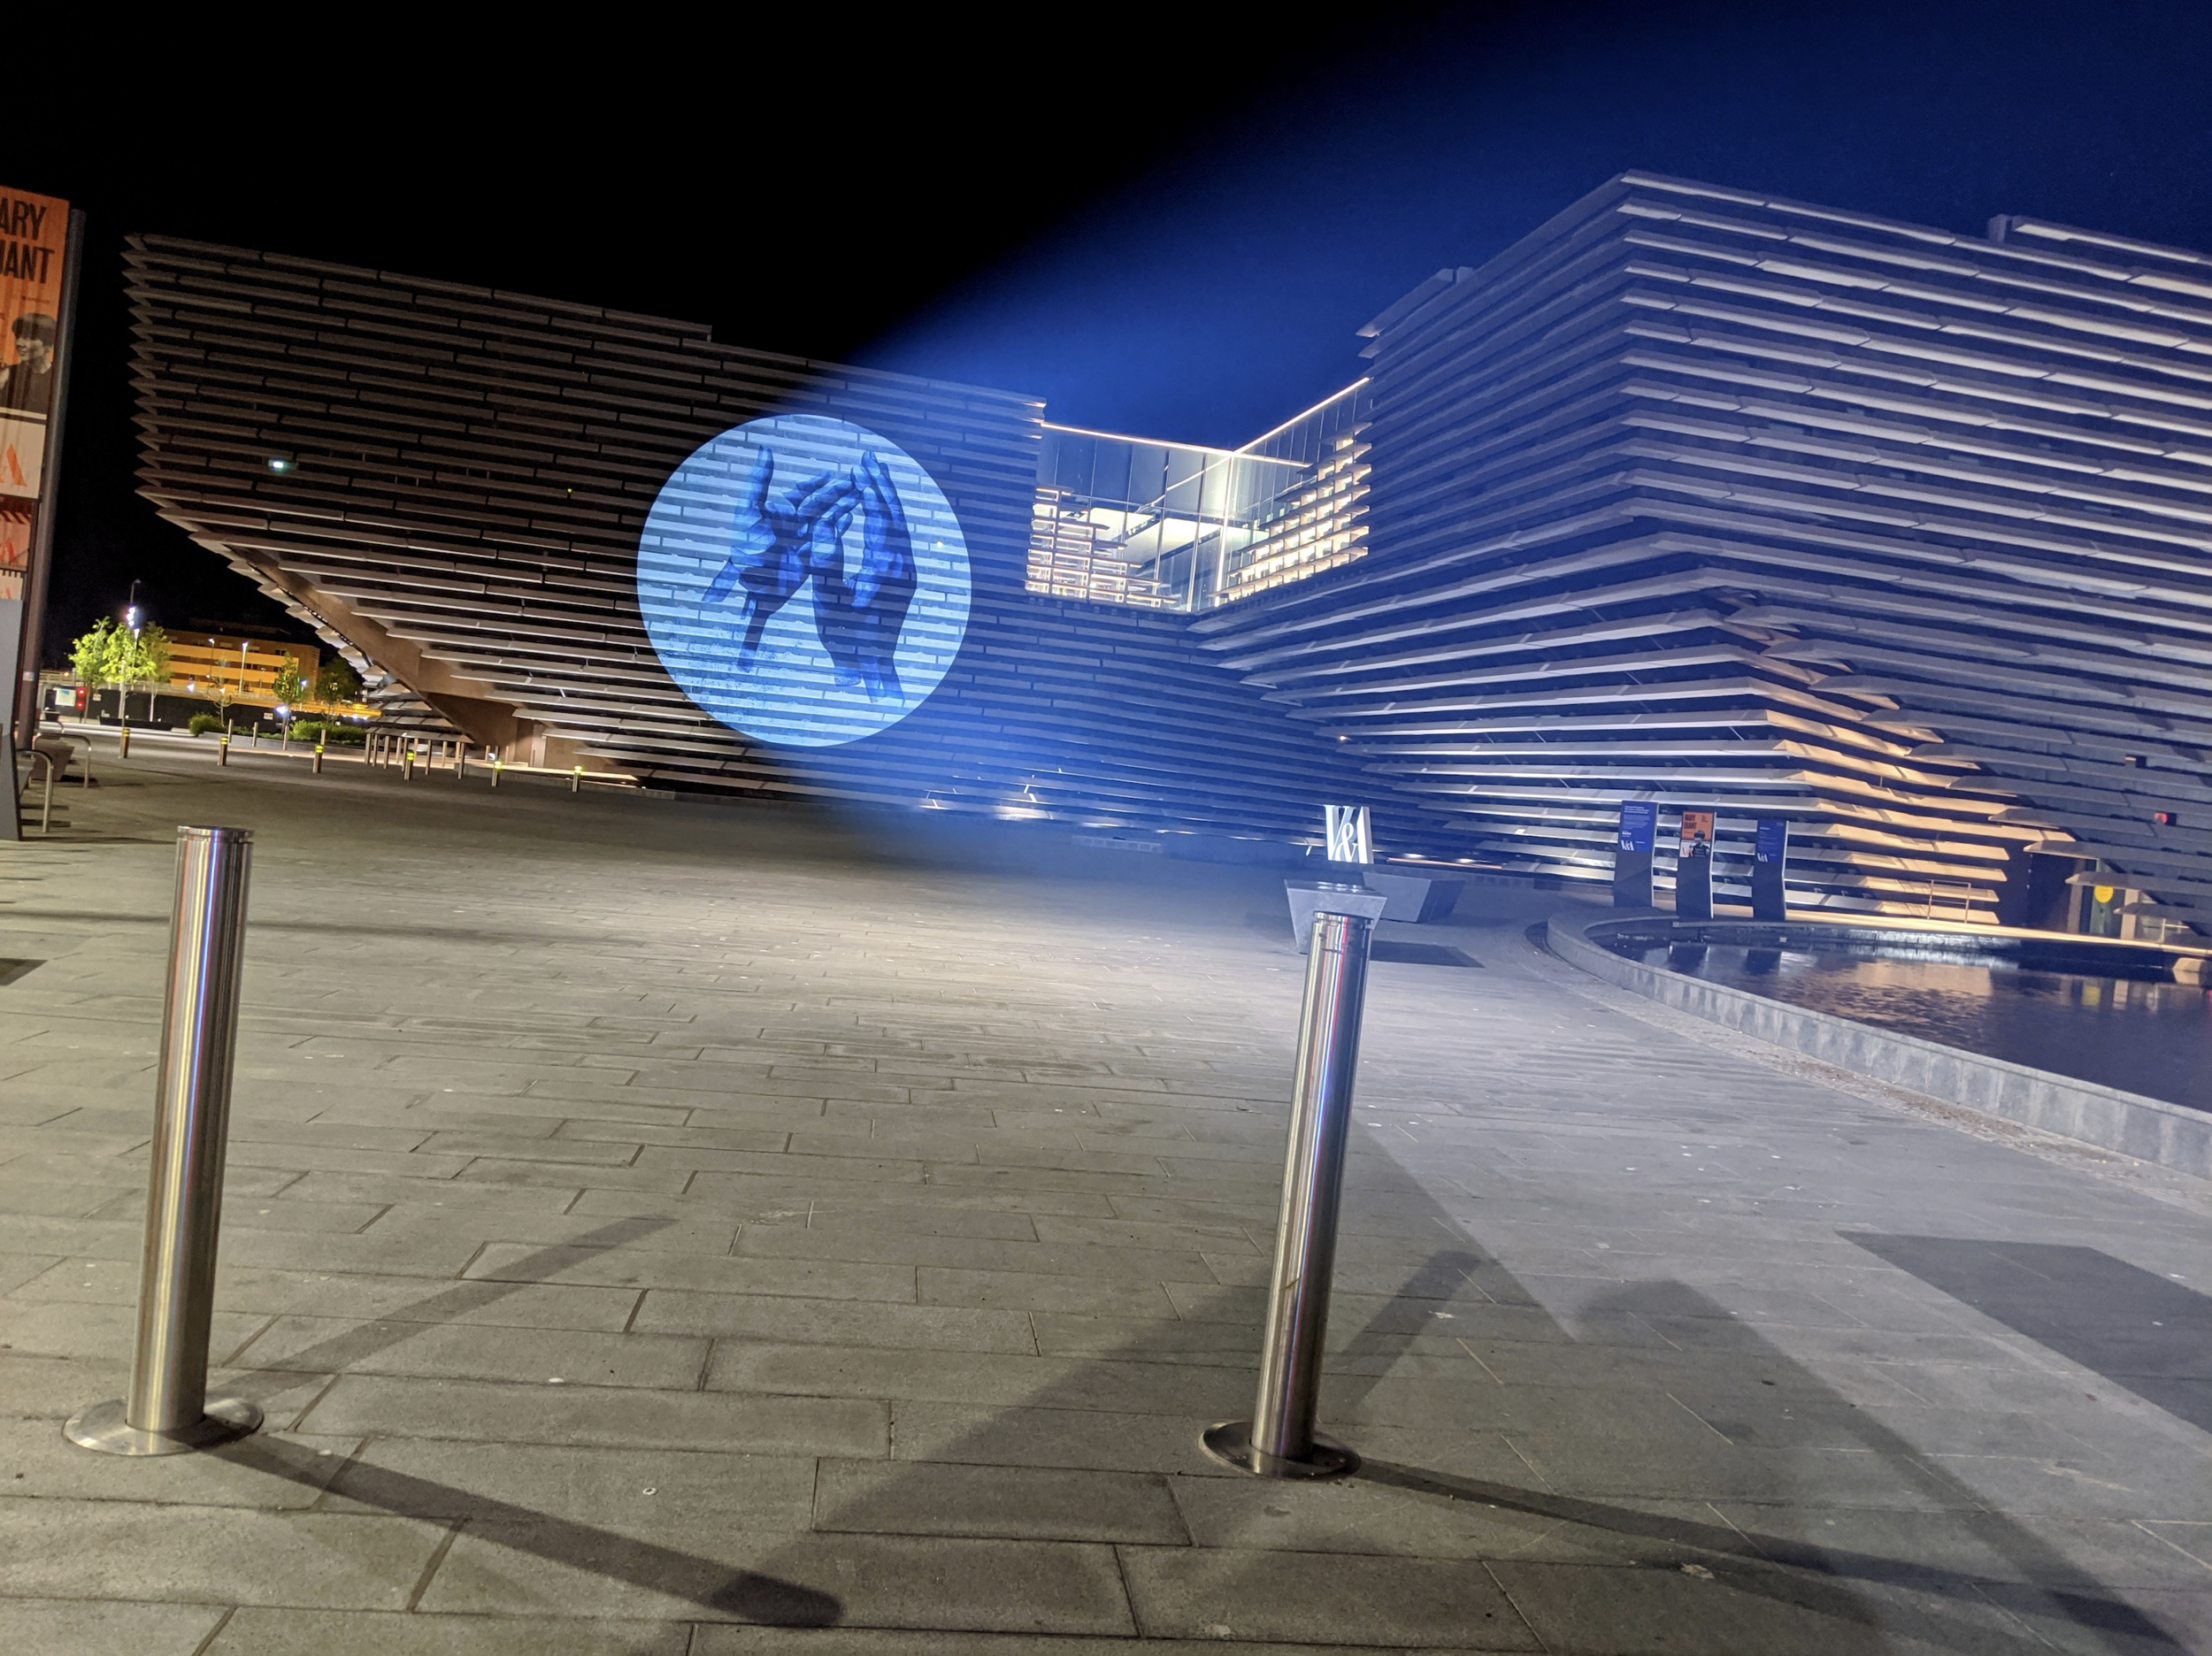  V&amp;A Dundee Projection   www.iclapfor.com  